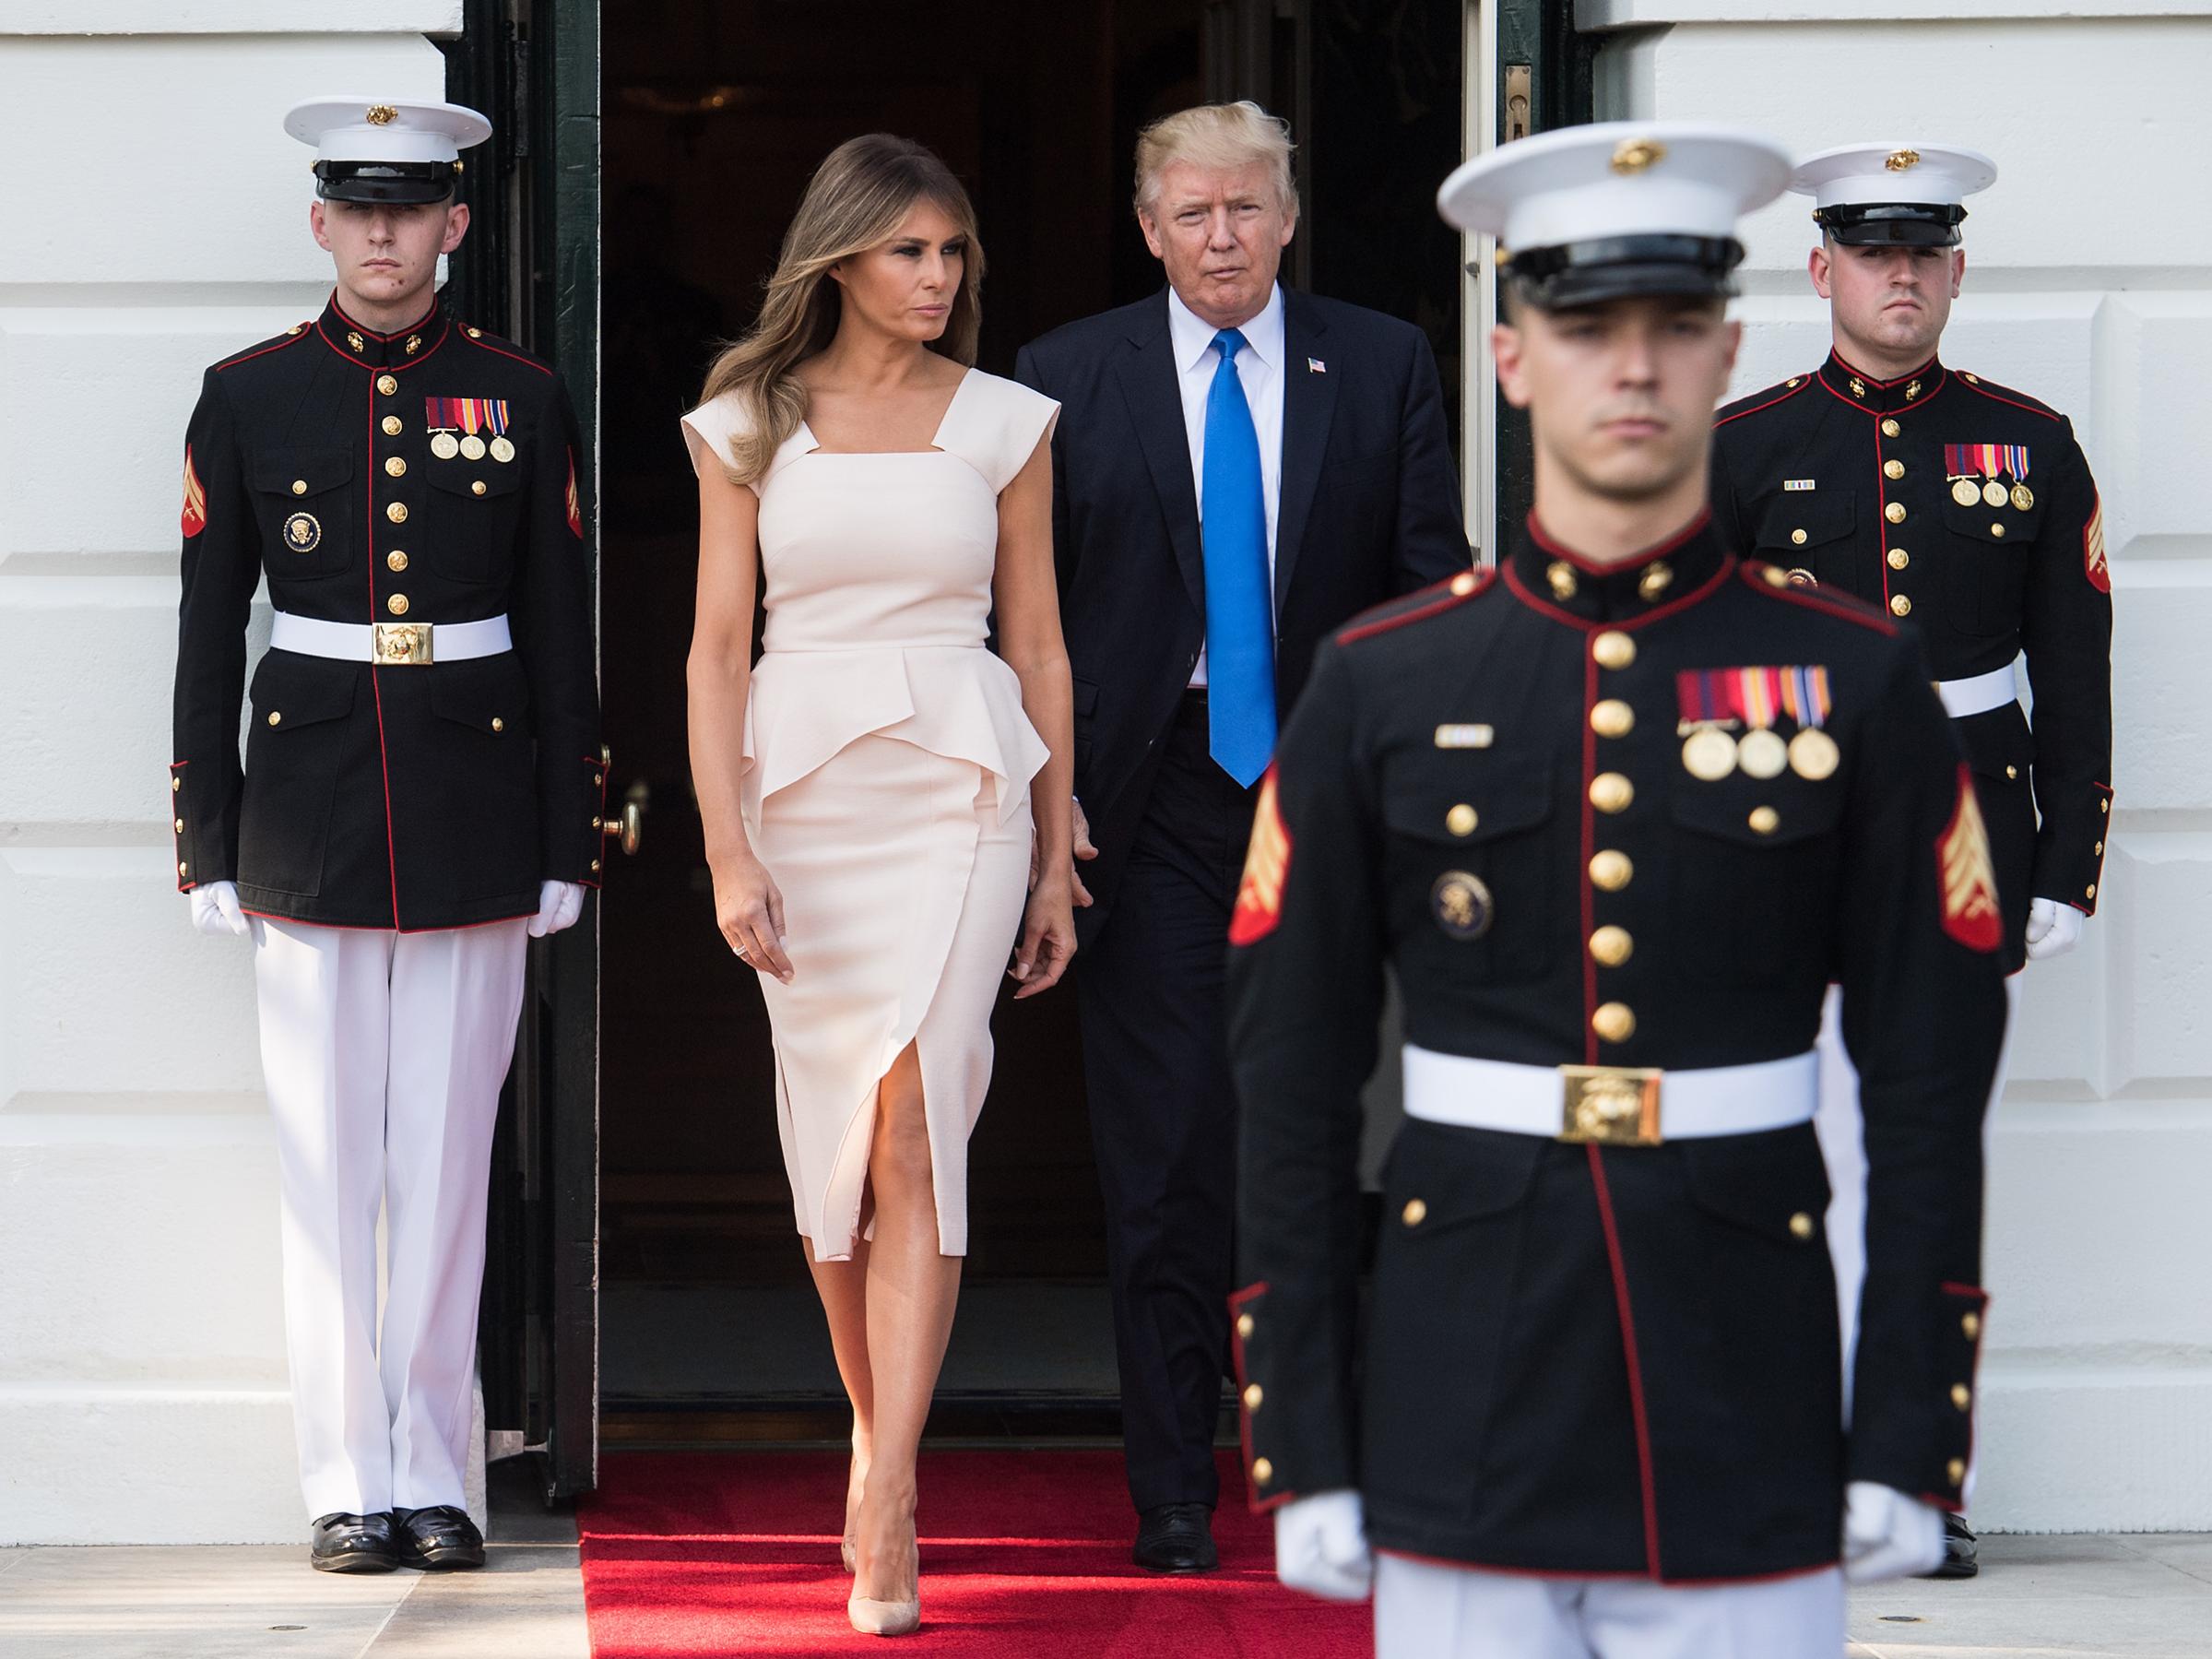 President Donald Trump and first lady Melania Trump wearing a Roland Mouret dress and Christian Louboutin shoes, walk out to receive South Korean President Moon Jae-in and his wife Kim Jeong-suk at the White House in Washington, DC, on June 29, 2017.